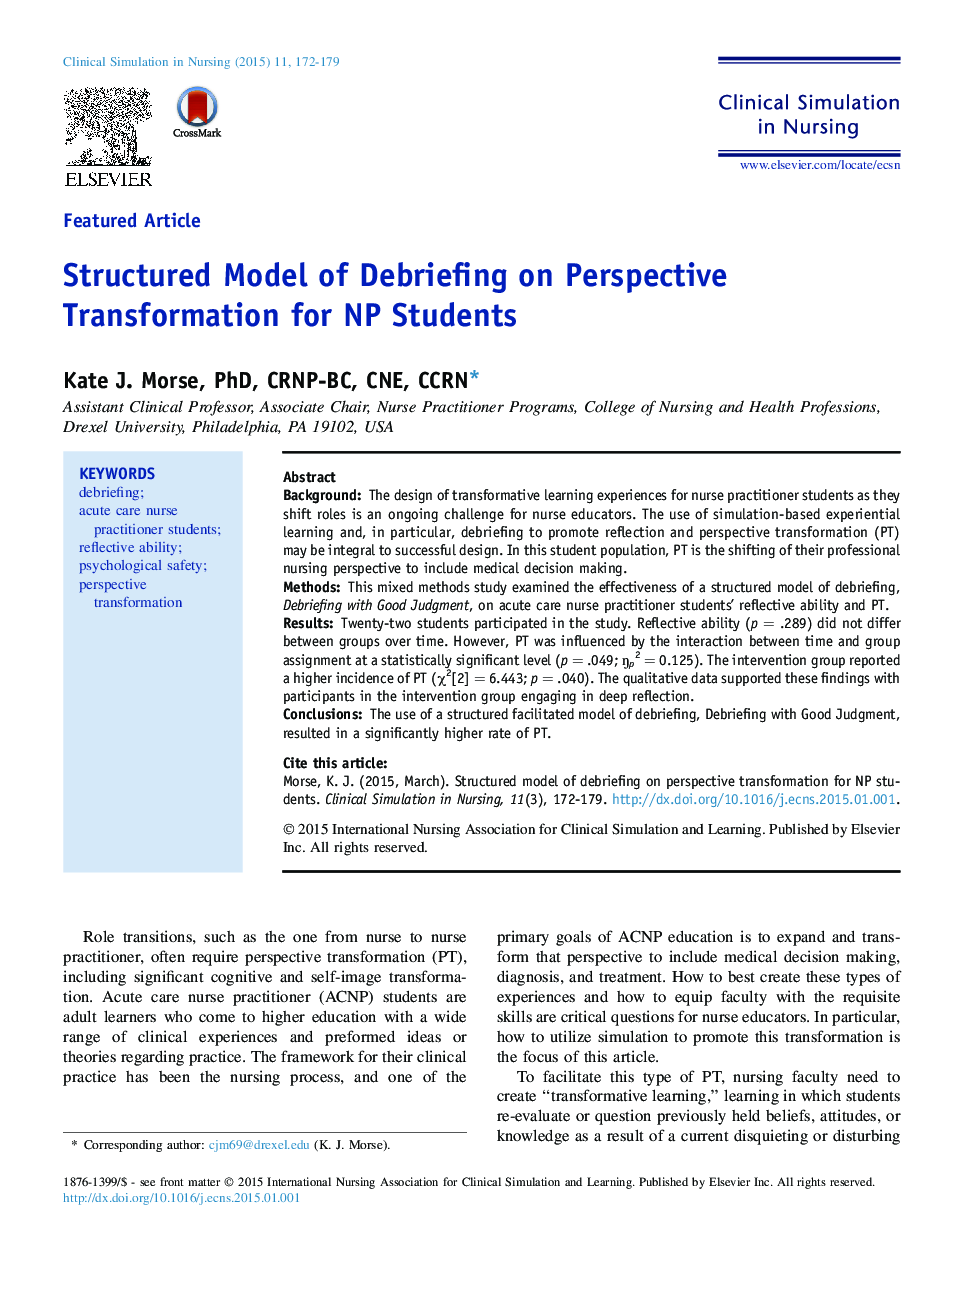 Structured Model of Debriefing on Perspective Transformation for NP Students